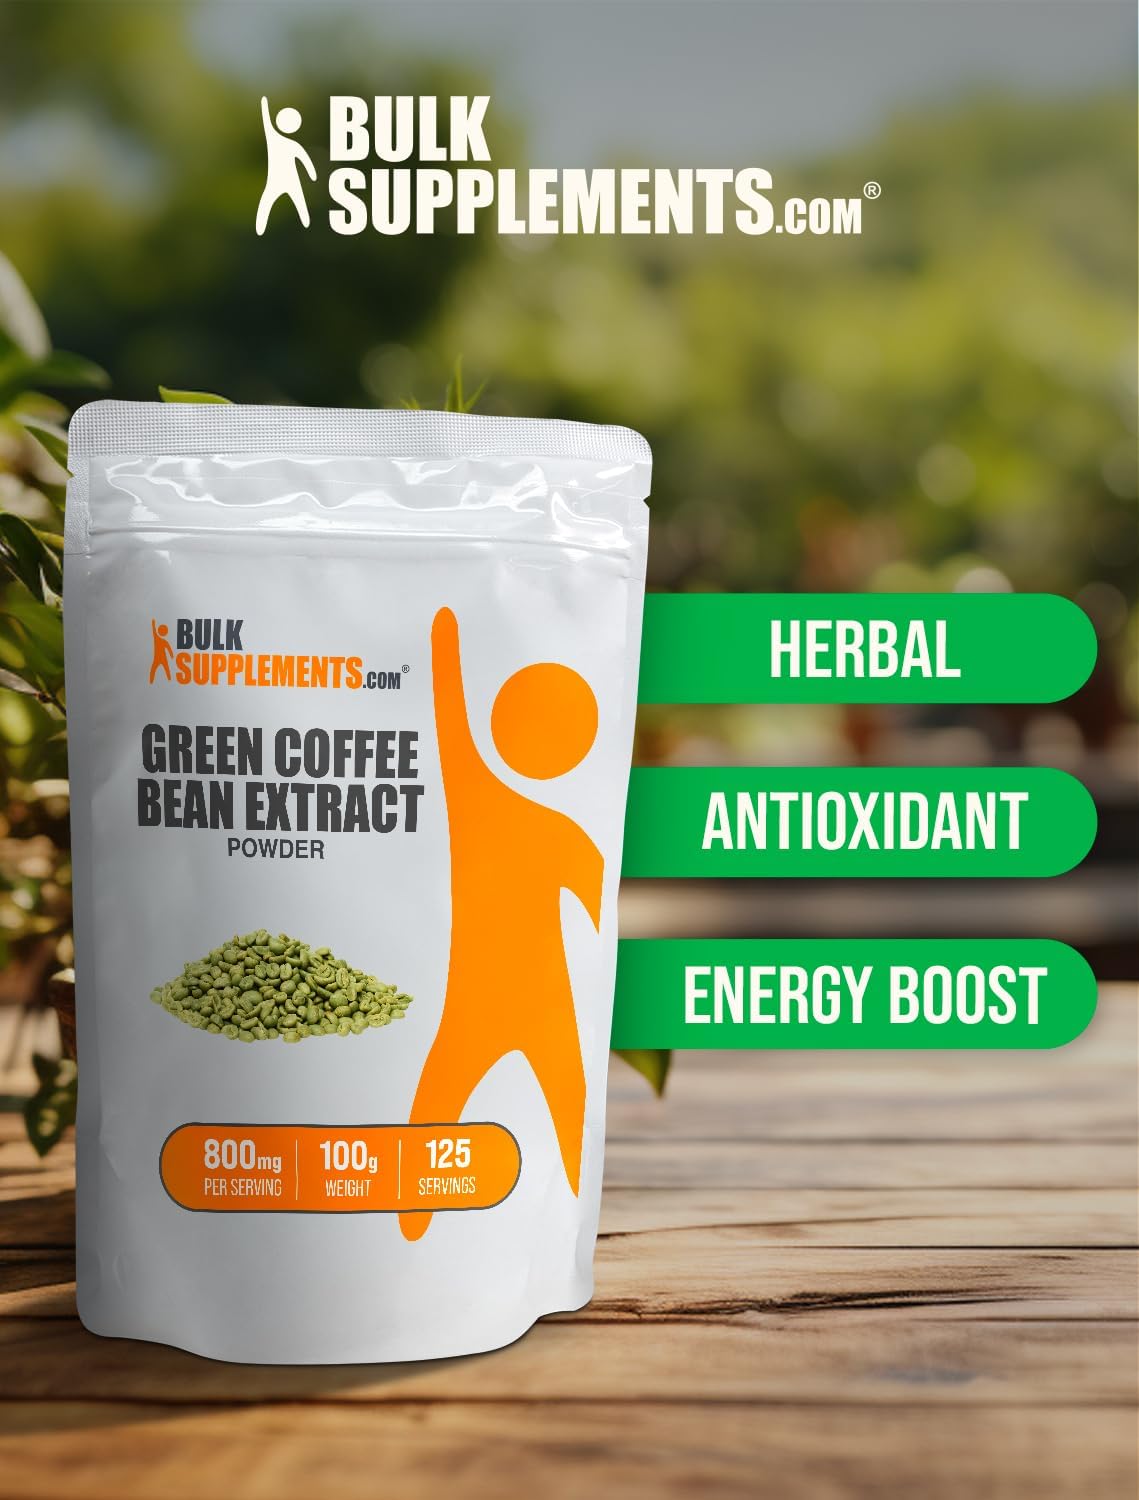 BULKSUPPLEMENTS.COM Green Coffee Bean Extract Powder - Green Coffee Bean Supplements, Green Coffee Bean Powder - Energy Support, Gluten Free, 800mg per Serving, 100g (3.5 oz) (Pack of 1) : Health & Household